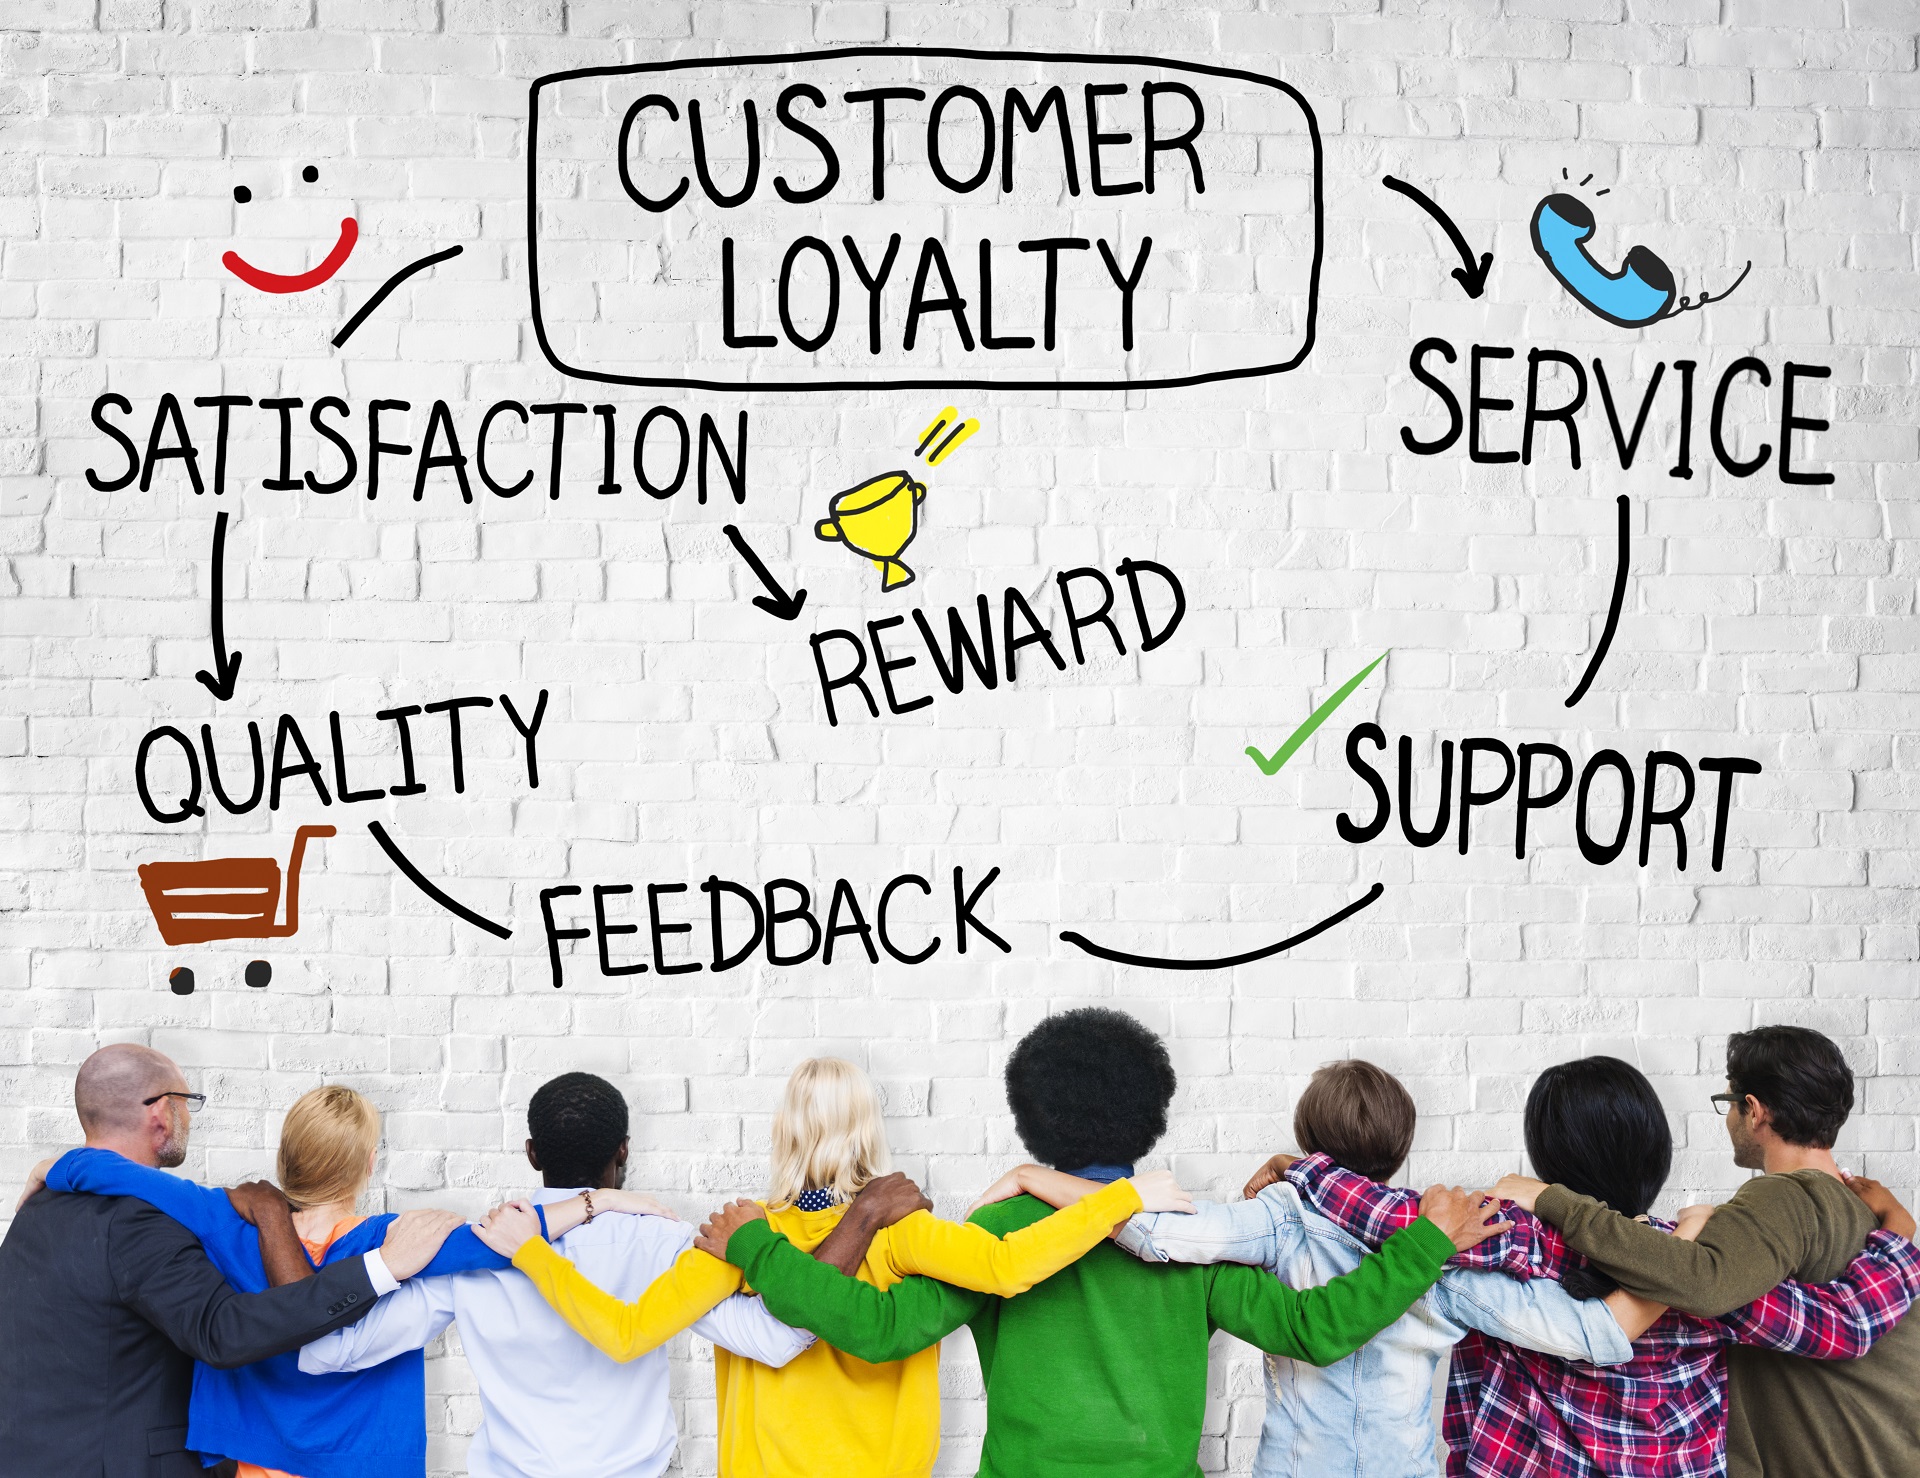 Customer loyalty matters to business growth. 